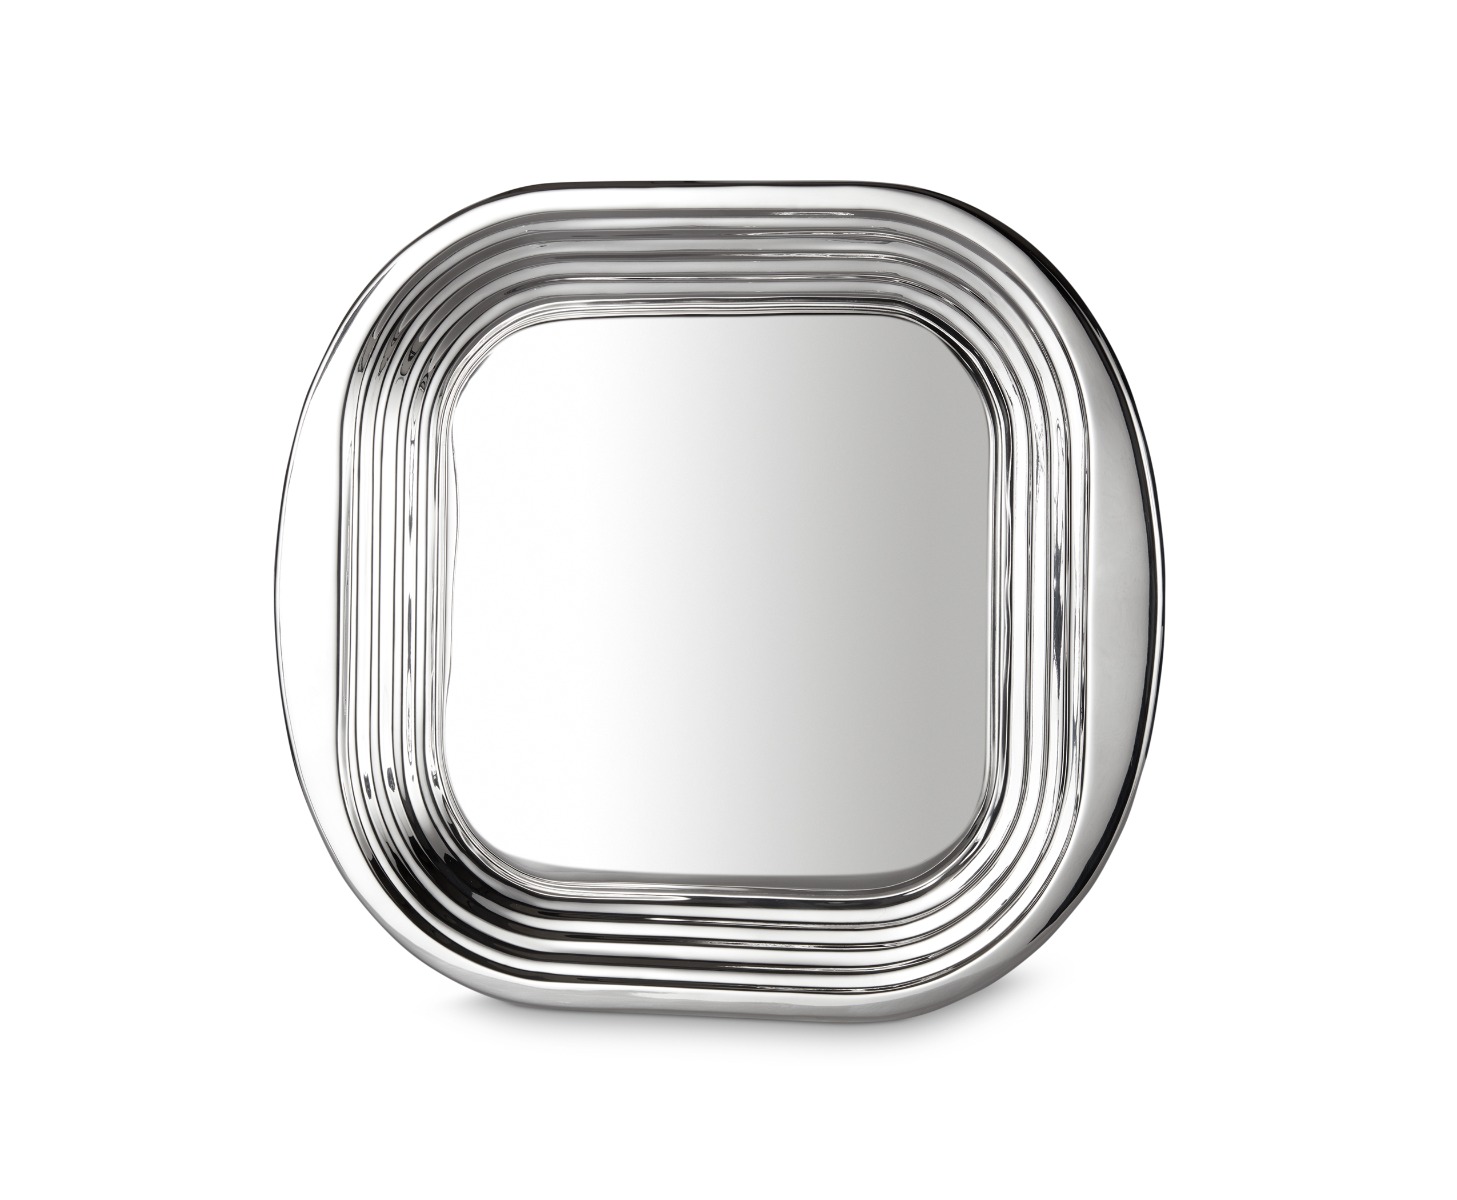 Tom Dixon - Form Tray Stainless Steel